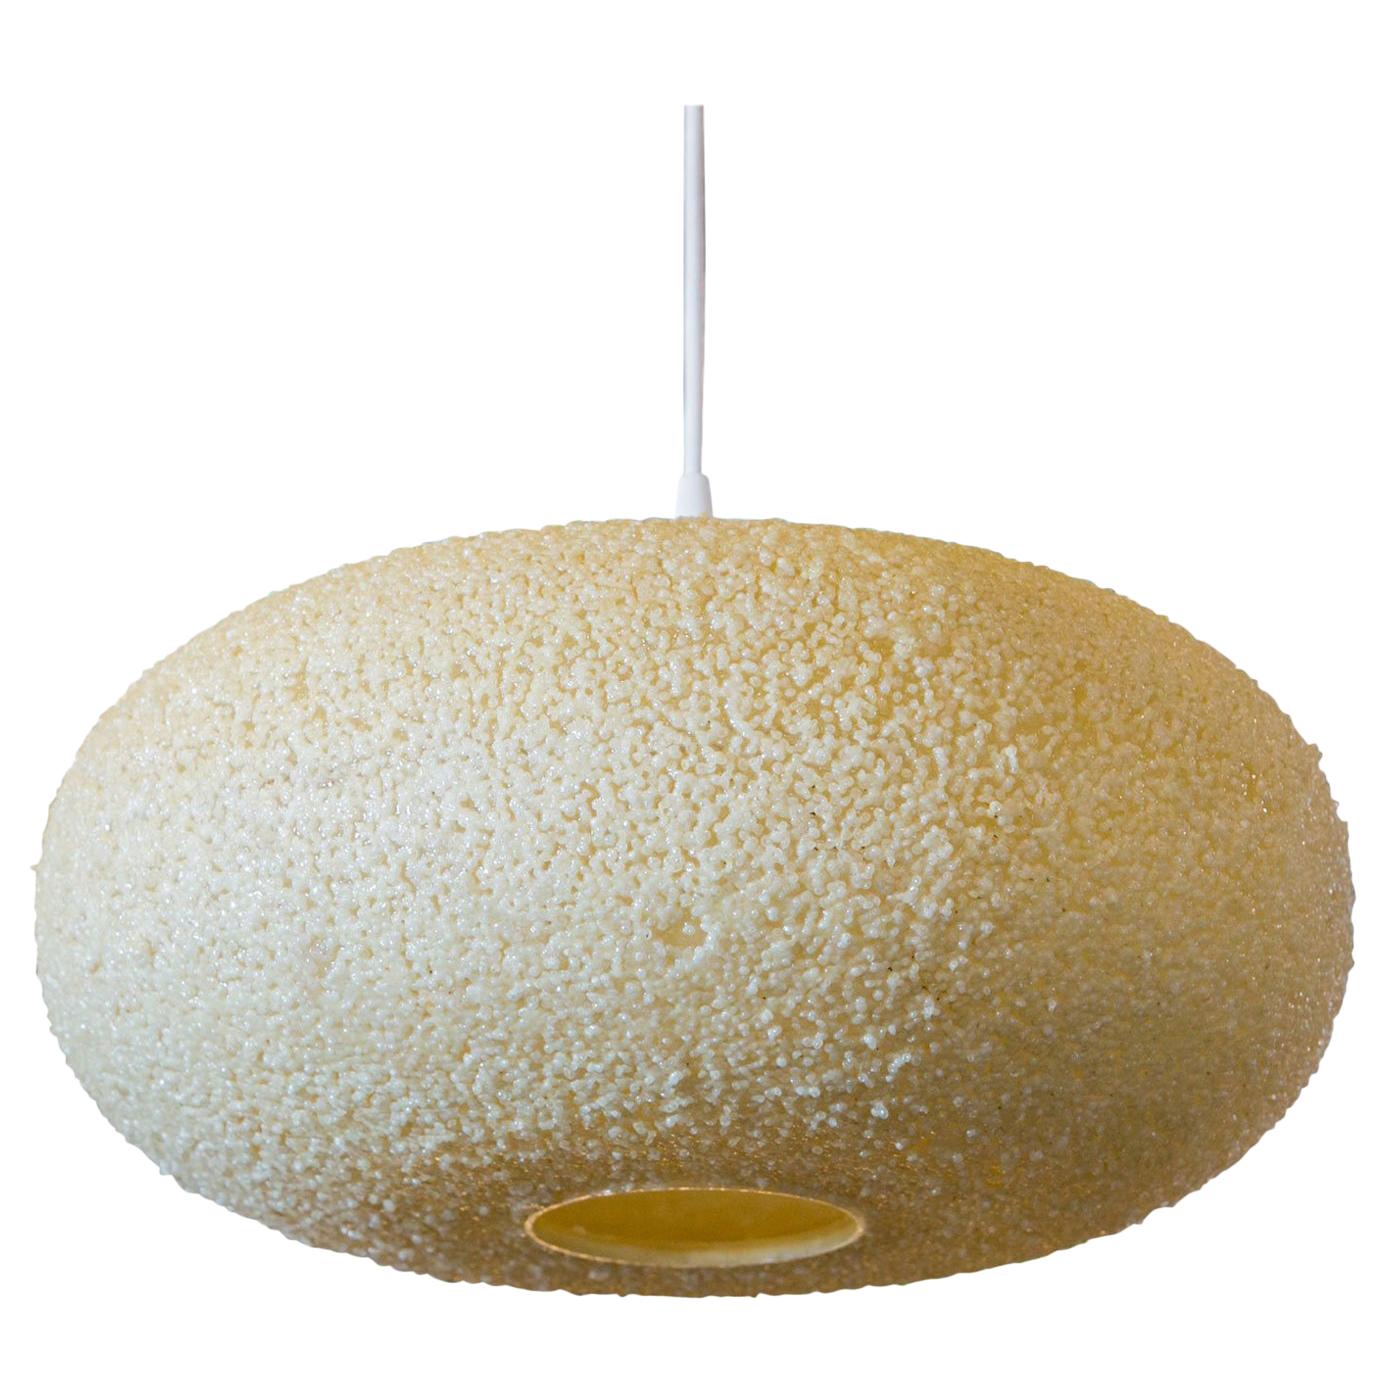 Modern Plastic or Resin Spherical-Shaped Pendant with Sugar Cube Finish.